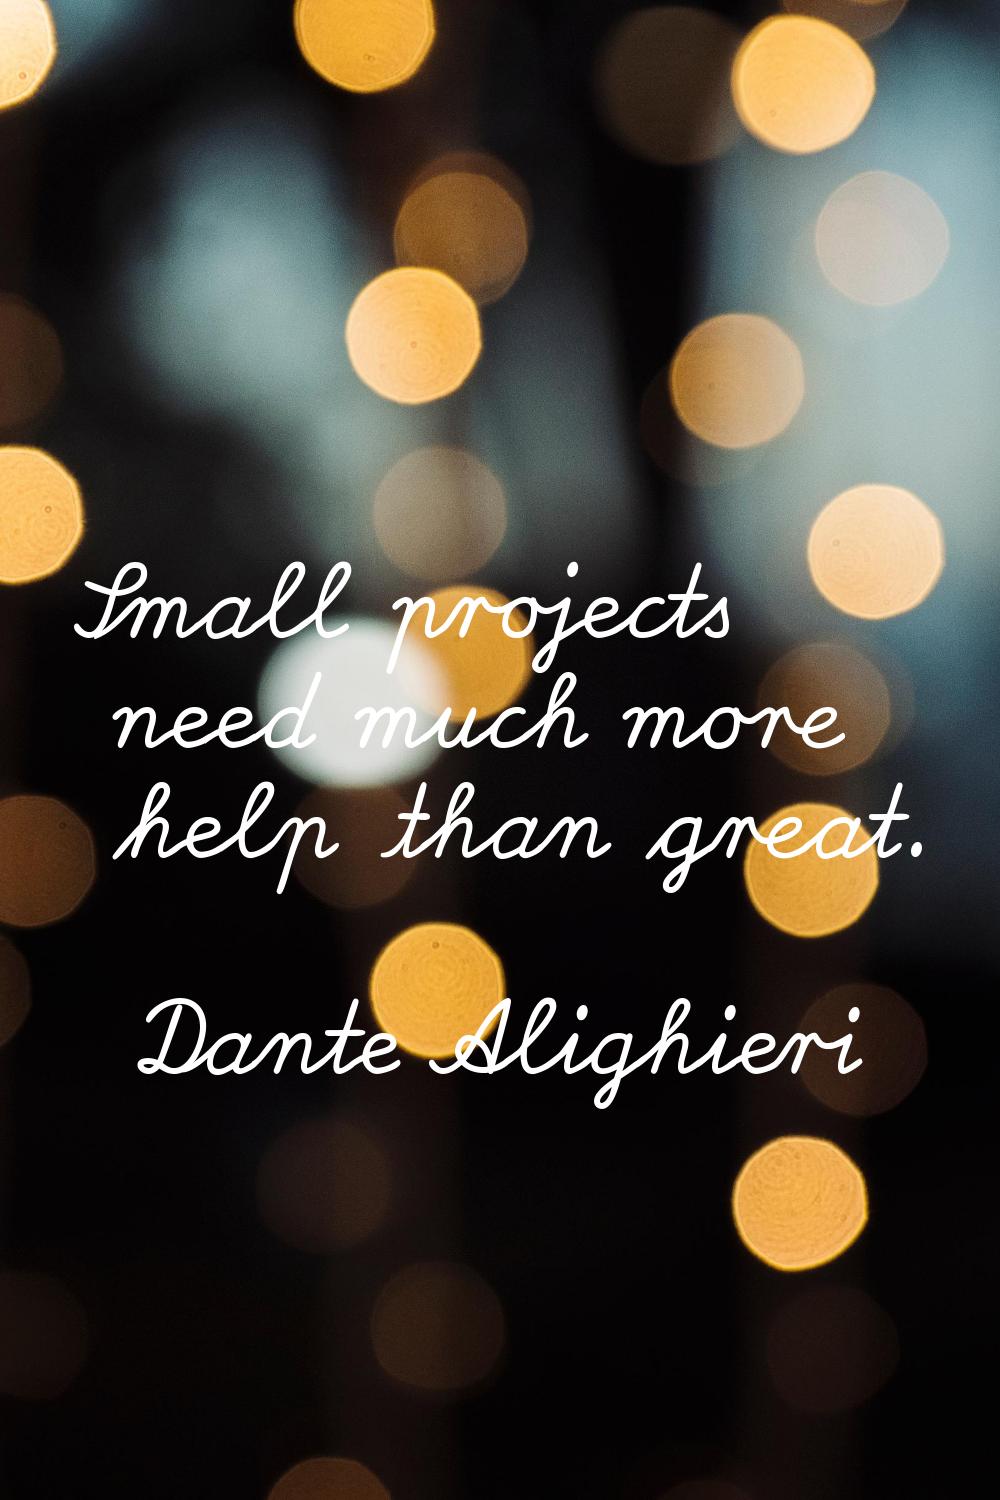 Small projects need much more help than great.